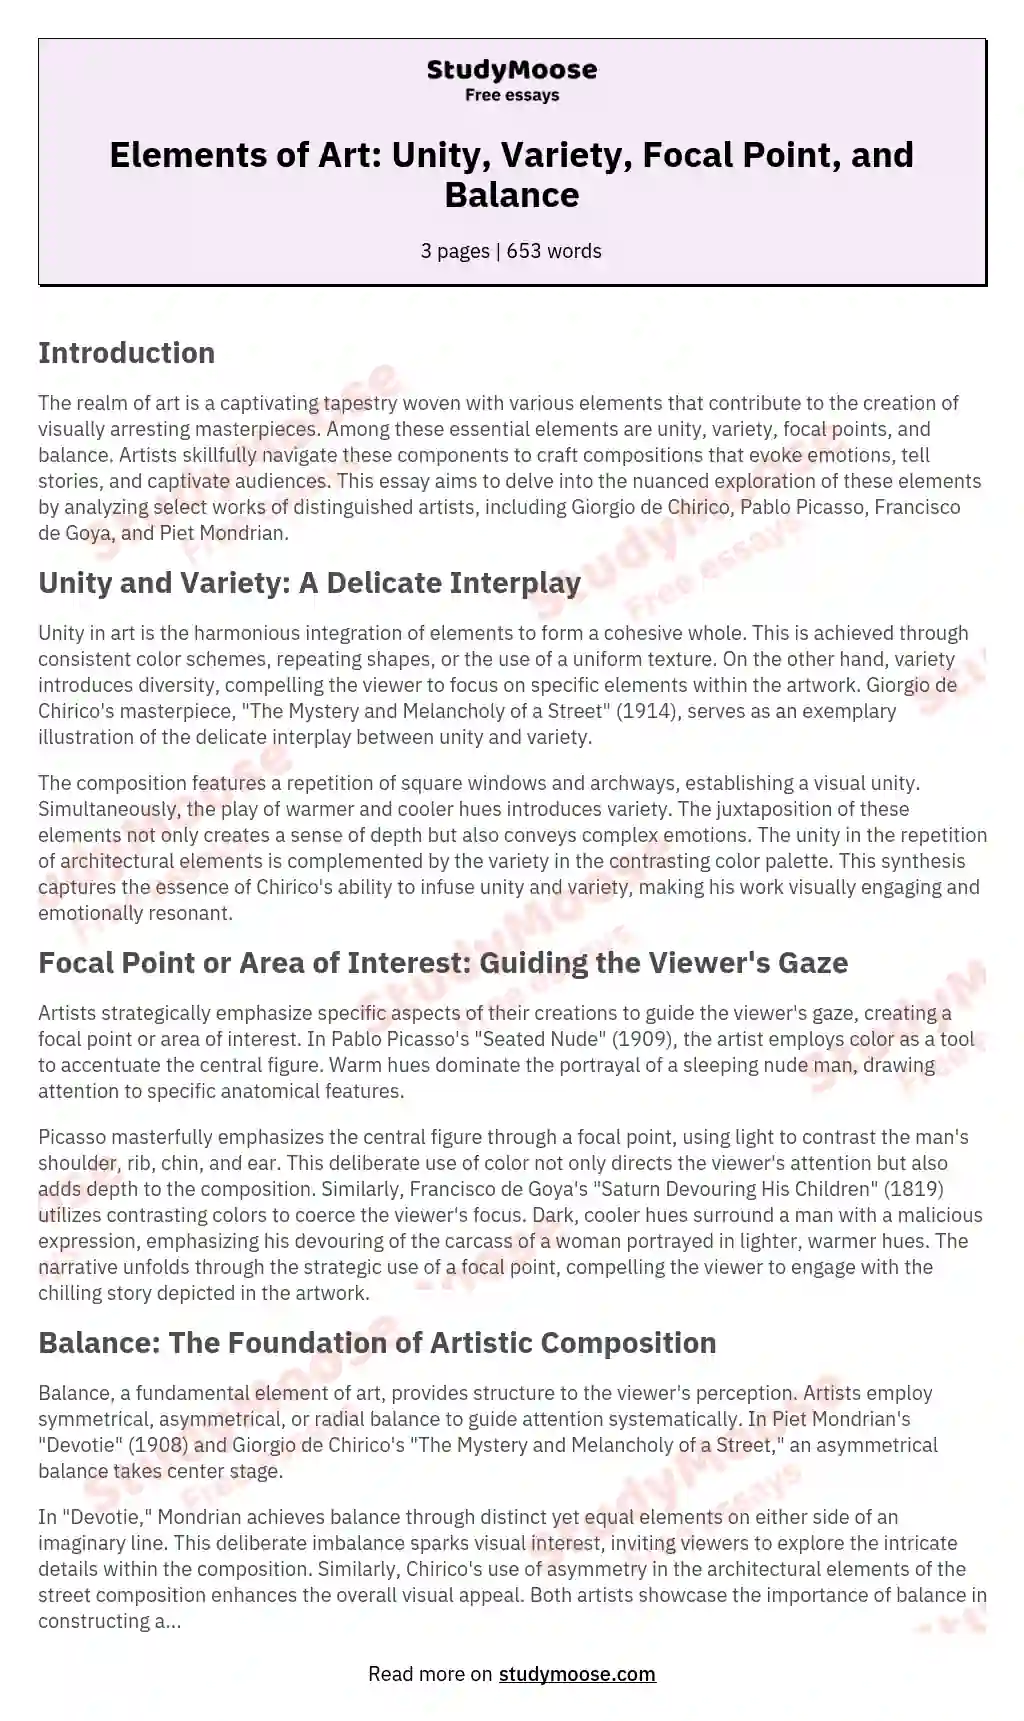 Elements of Art: Unity, Variety, Focal Point, and Balance essay